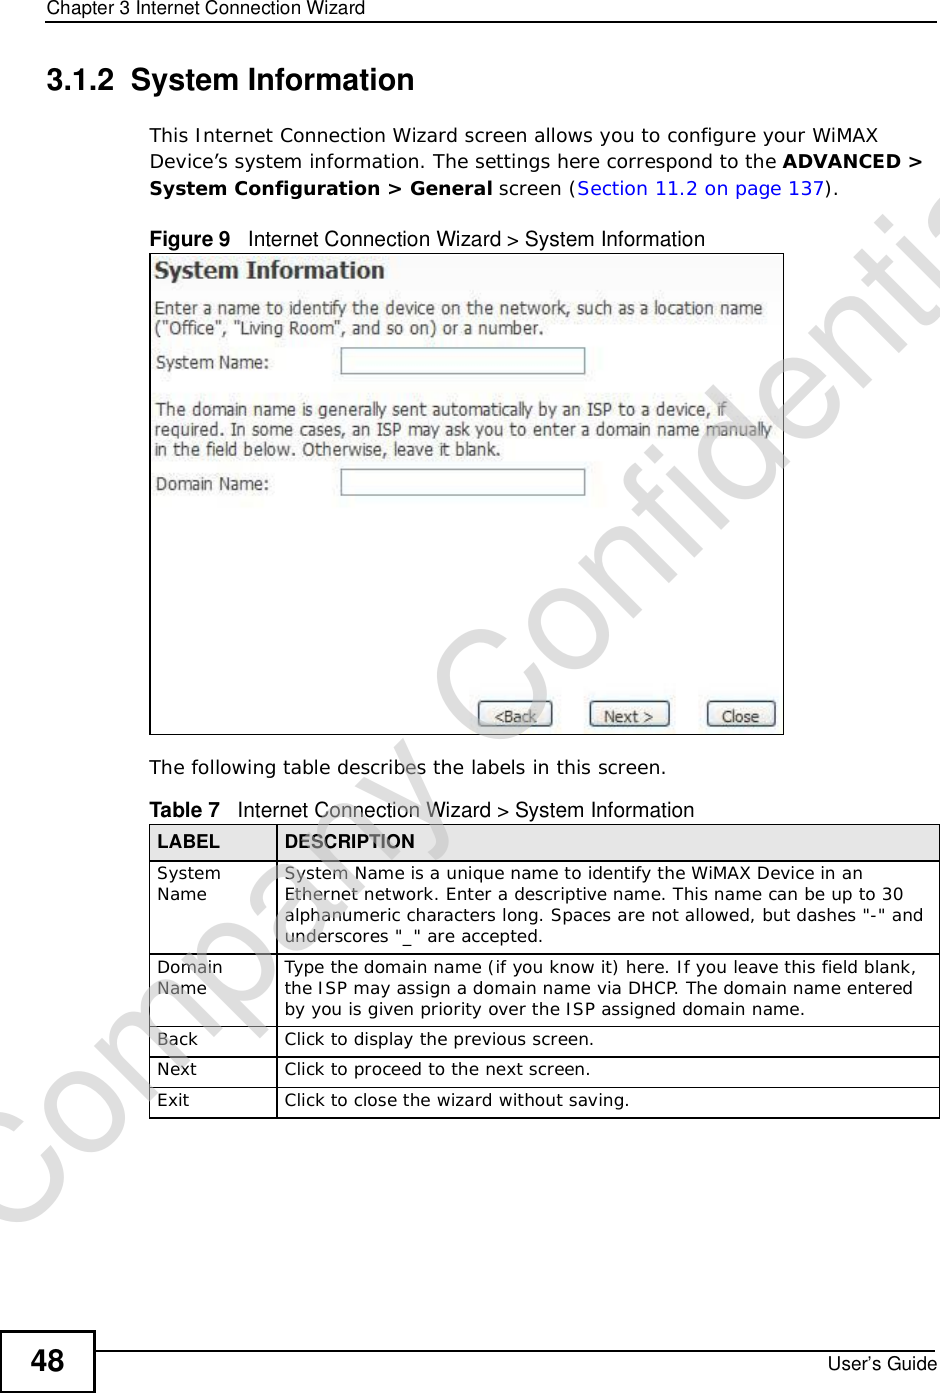 Chapter 3Internet Connection WizardUser’s Guide483.1.2  System InformationThis Internet Connection Wizard screen allows you to configure your WiMAX Device’s system information. The settings here correspond to the ADVANCED &gt; System Configuration &gt; General screen (Section 11.2 on page 137).Figure 9   Internet Connection Wizard &gt; System InformationThe following table describes the labels in this screen.Table 7   Internet Connection Wizard &gt; System InformationLABEL DESCRIPTIONSystem Name System Name is a unique name to identify the WiMAX Device in an Ethernet network. Enter a descriptive name. This name can be up to 30 alphanumeric characters long. Spaces are not allowed, but dashes &quot;-&quot; and underscores &quot;_&quot; are accepted. DomainName Type the domain name (if you know it) here. If you leave this field blank, the ISP may assign a domain name via DHCP. The domain name entered by you is given priority over the ISP assigned domain name.Back Click to display the previous screen.Next Click to proceed to the next screen. Exit Click to close the wizard without saving.Company Confidential